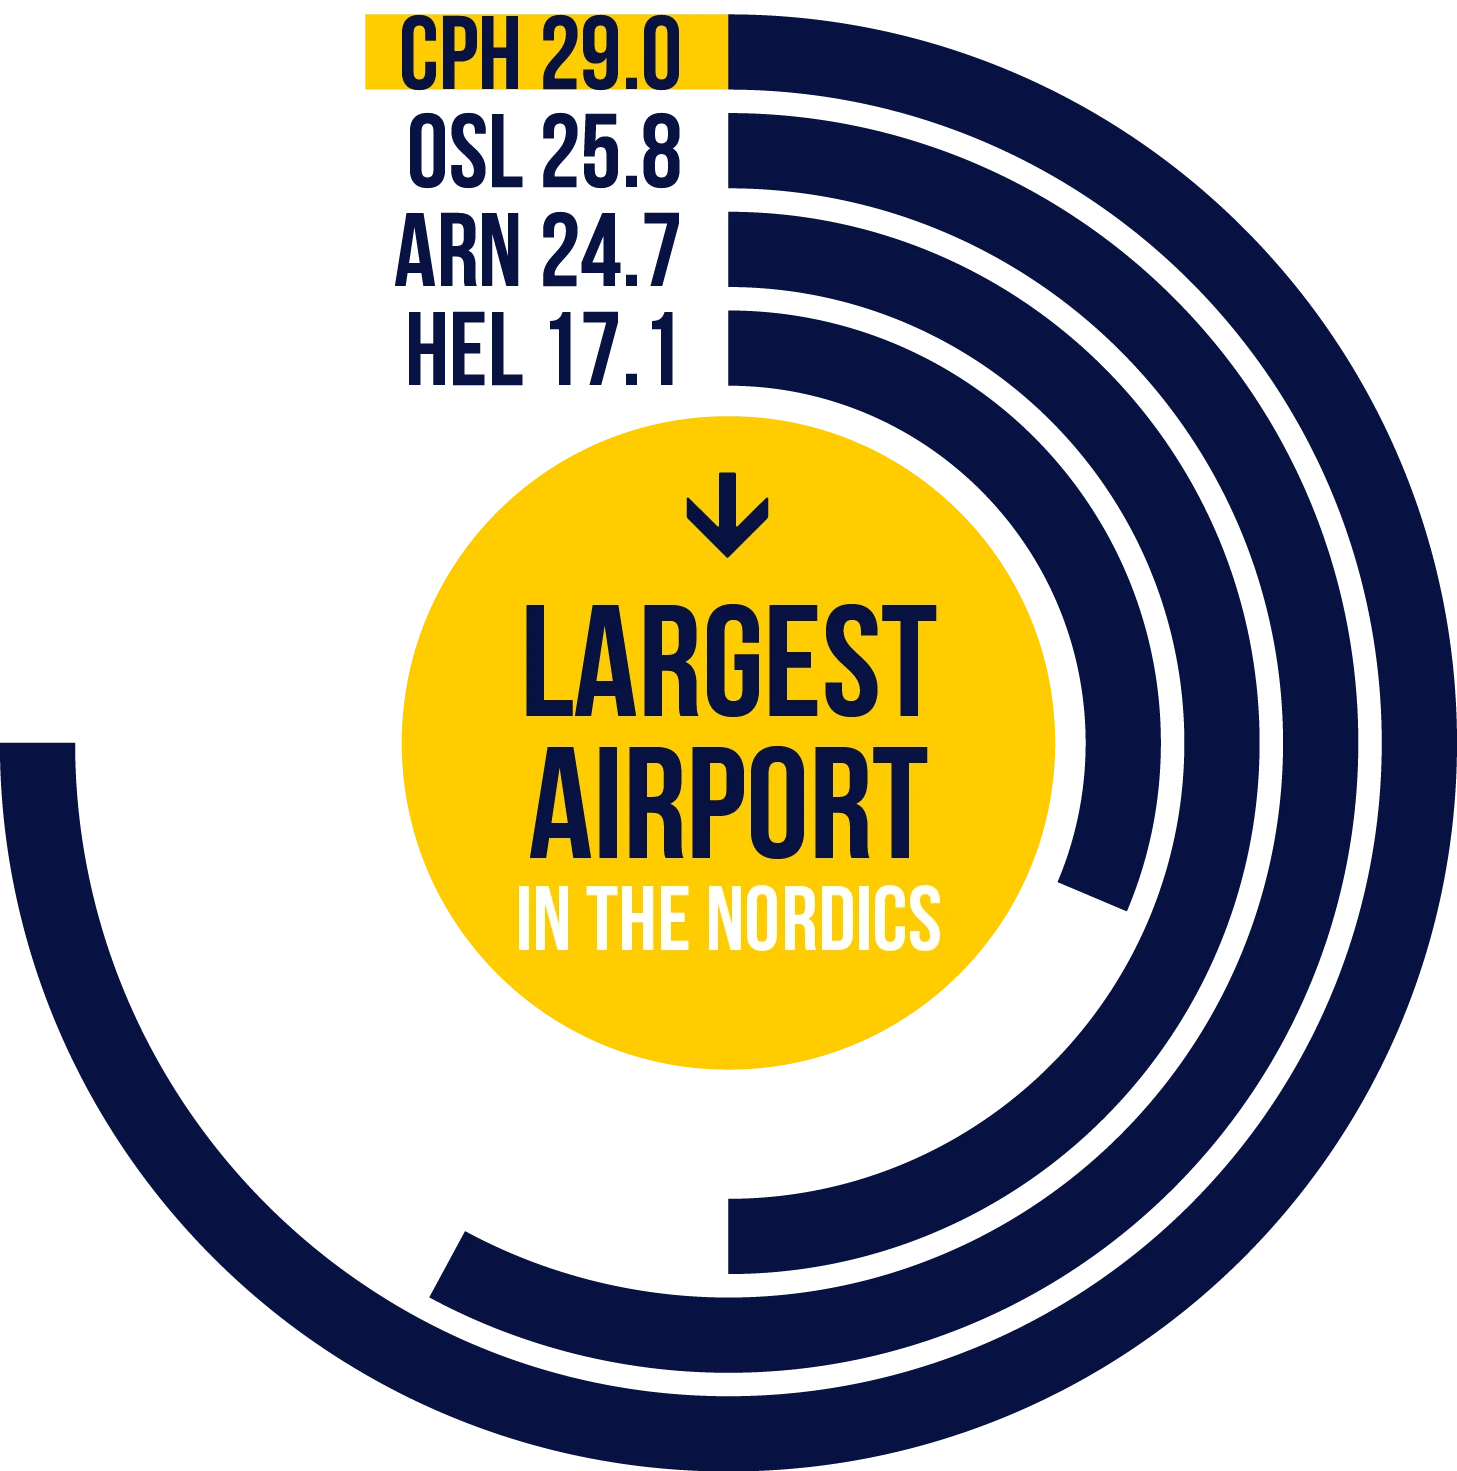 Gateway of Northern Europe / Largest Airport in Northern Europe